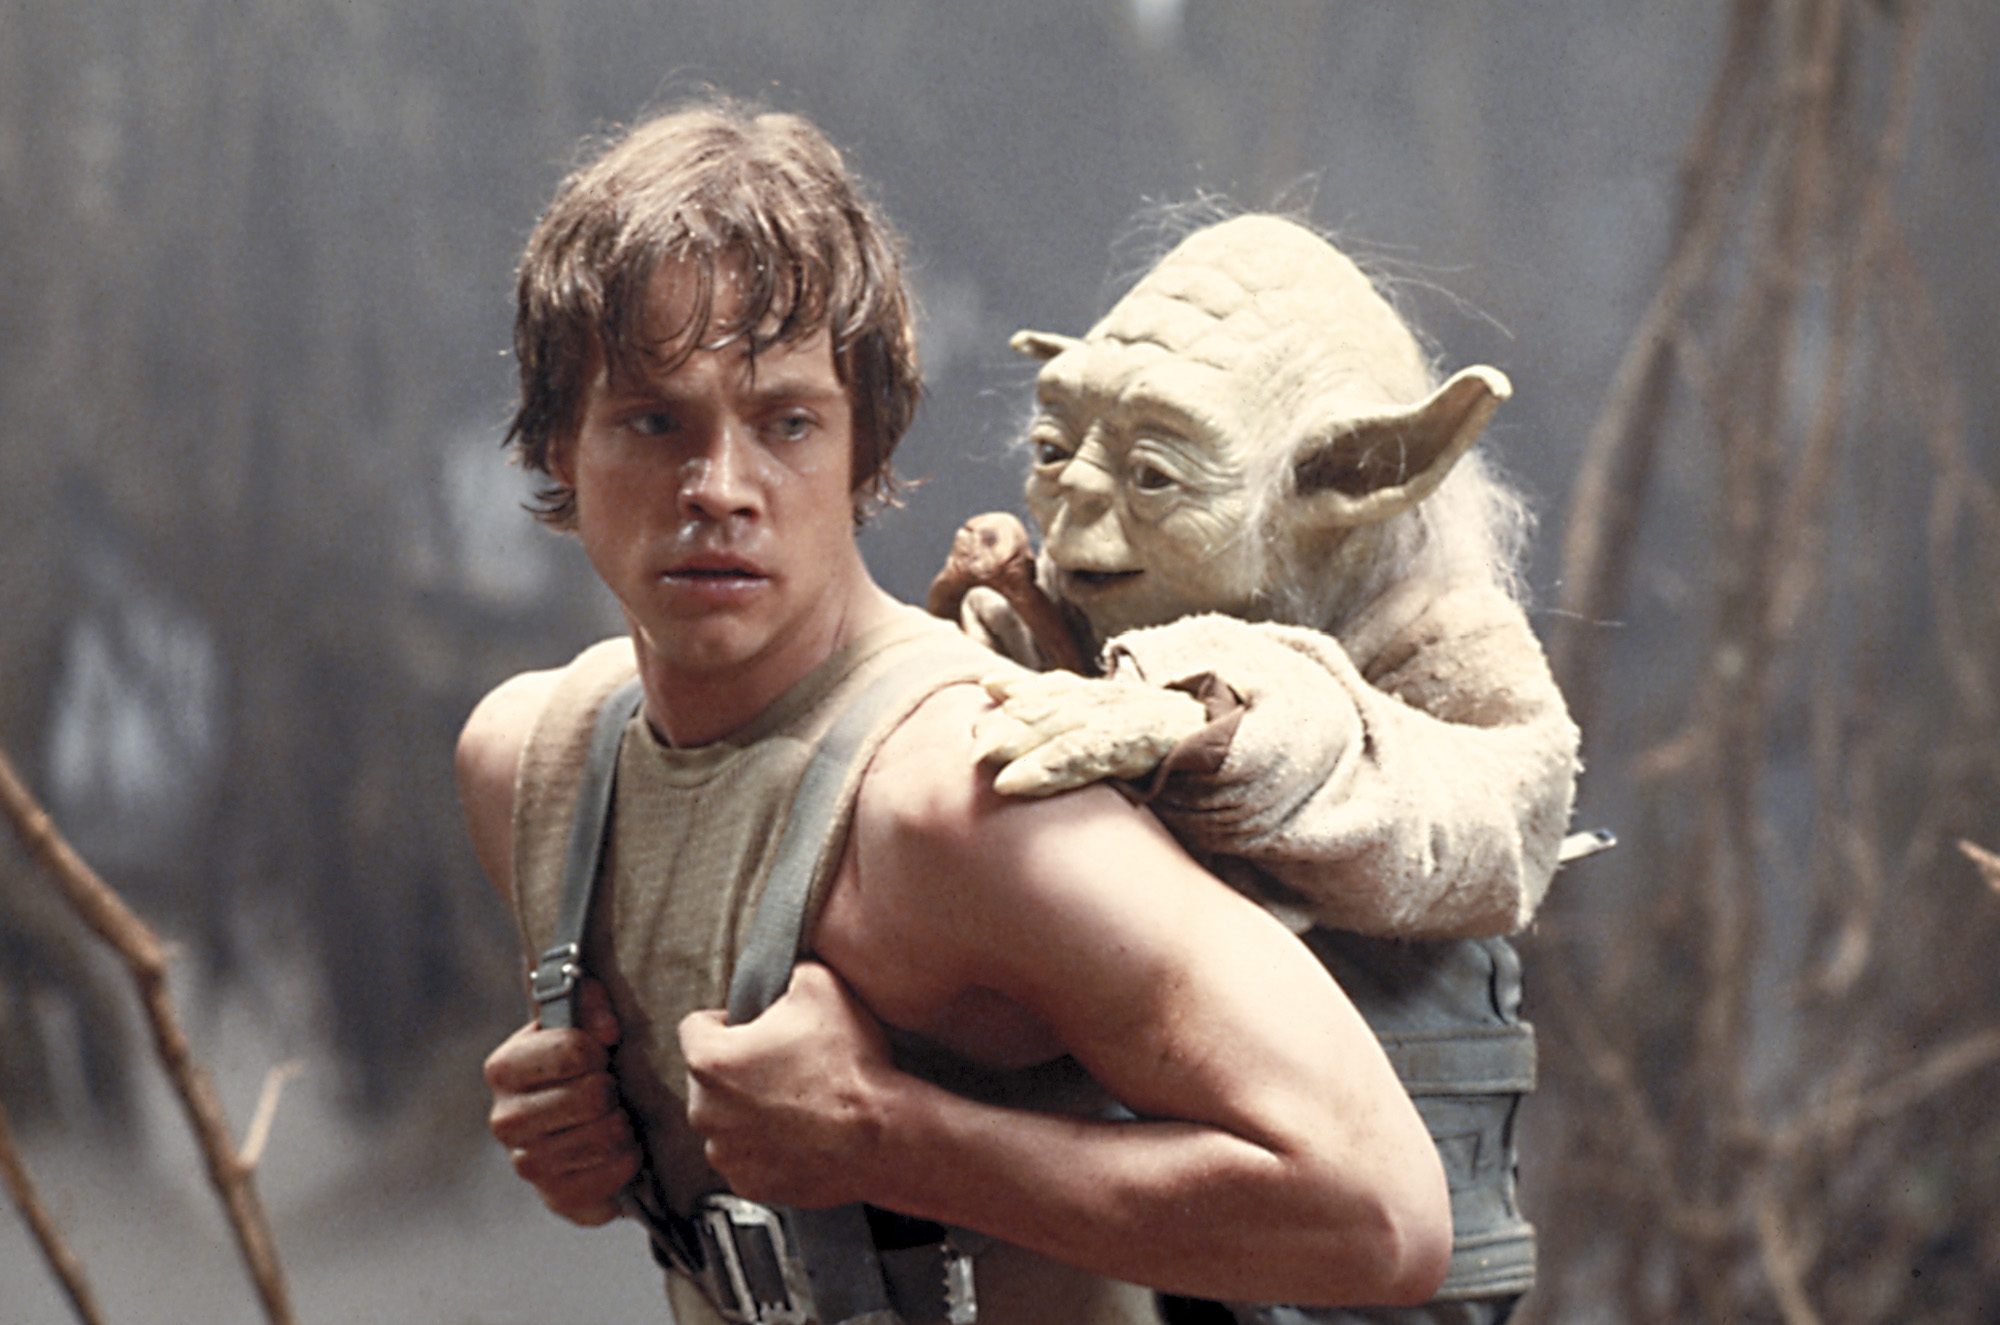 PHOTO: Mark Hamill is seen as Luke Skywalker with the character, Yoda, in a scene from the 1980 movie "Star Wars Episode V: The Empire Strikes Back."  